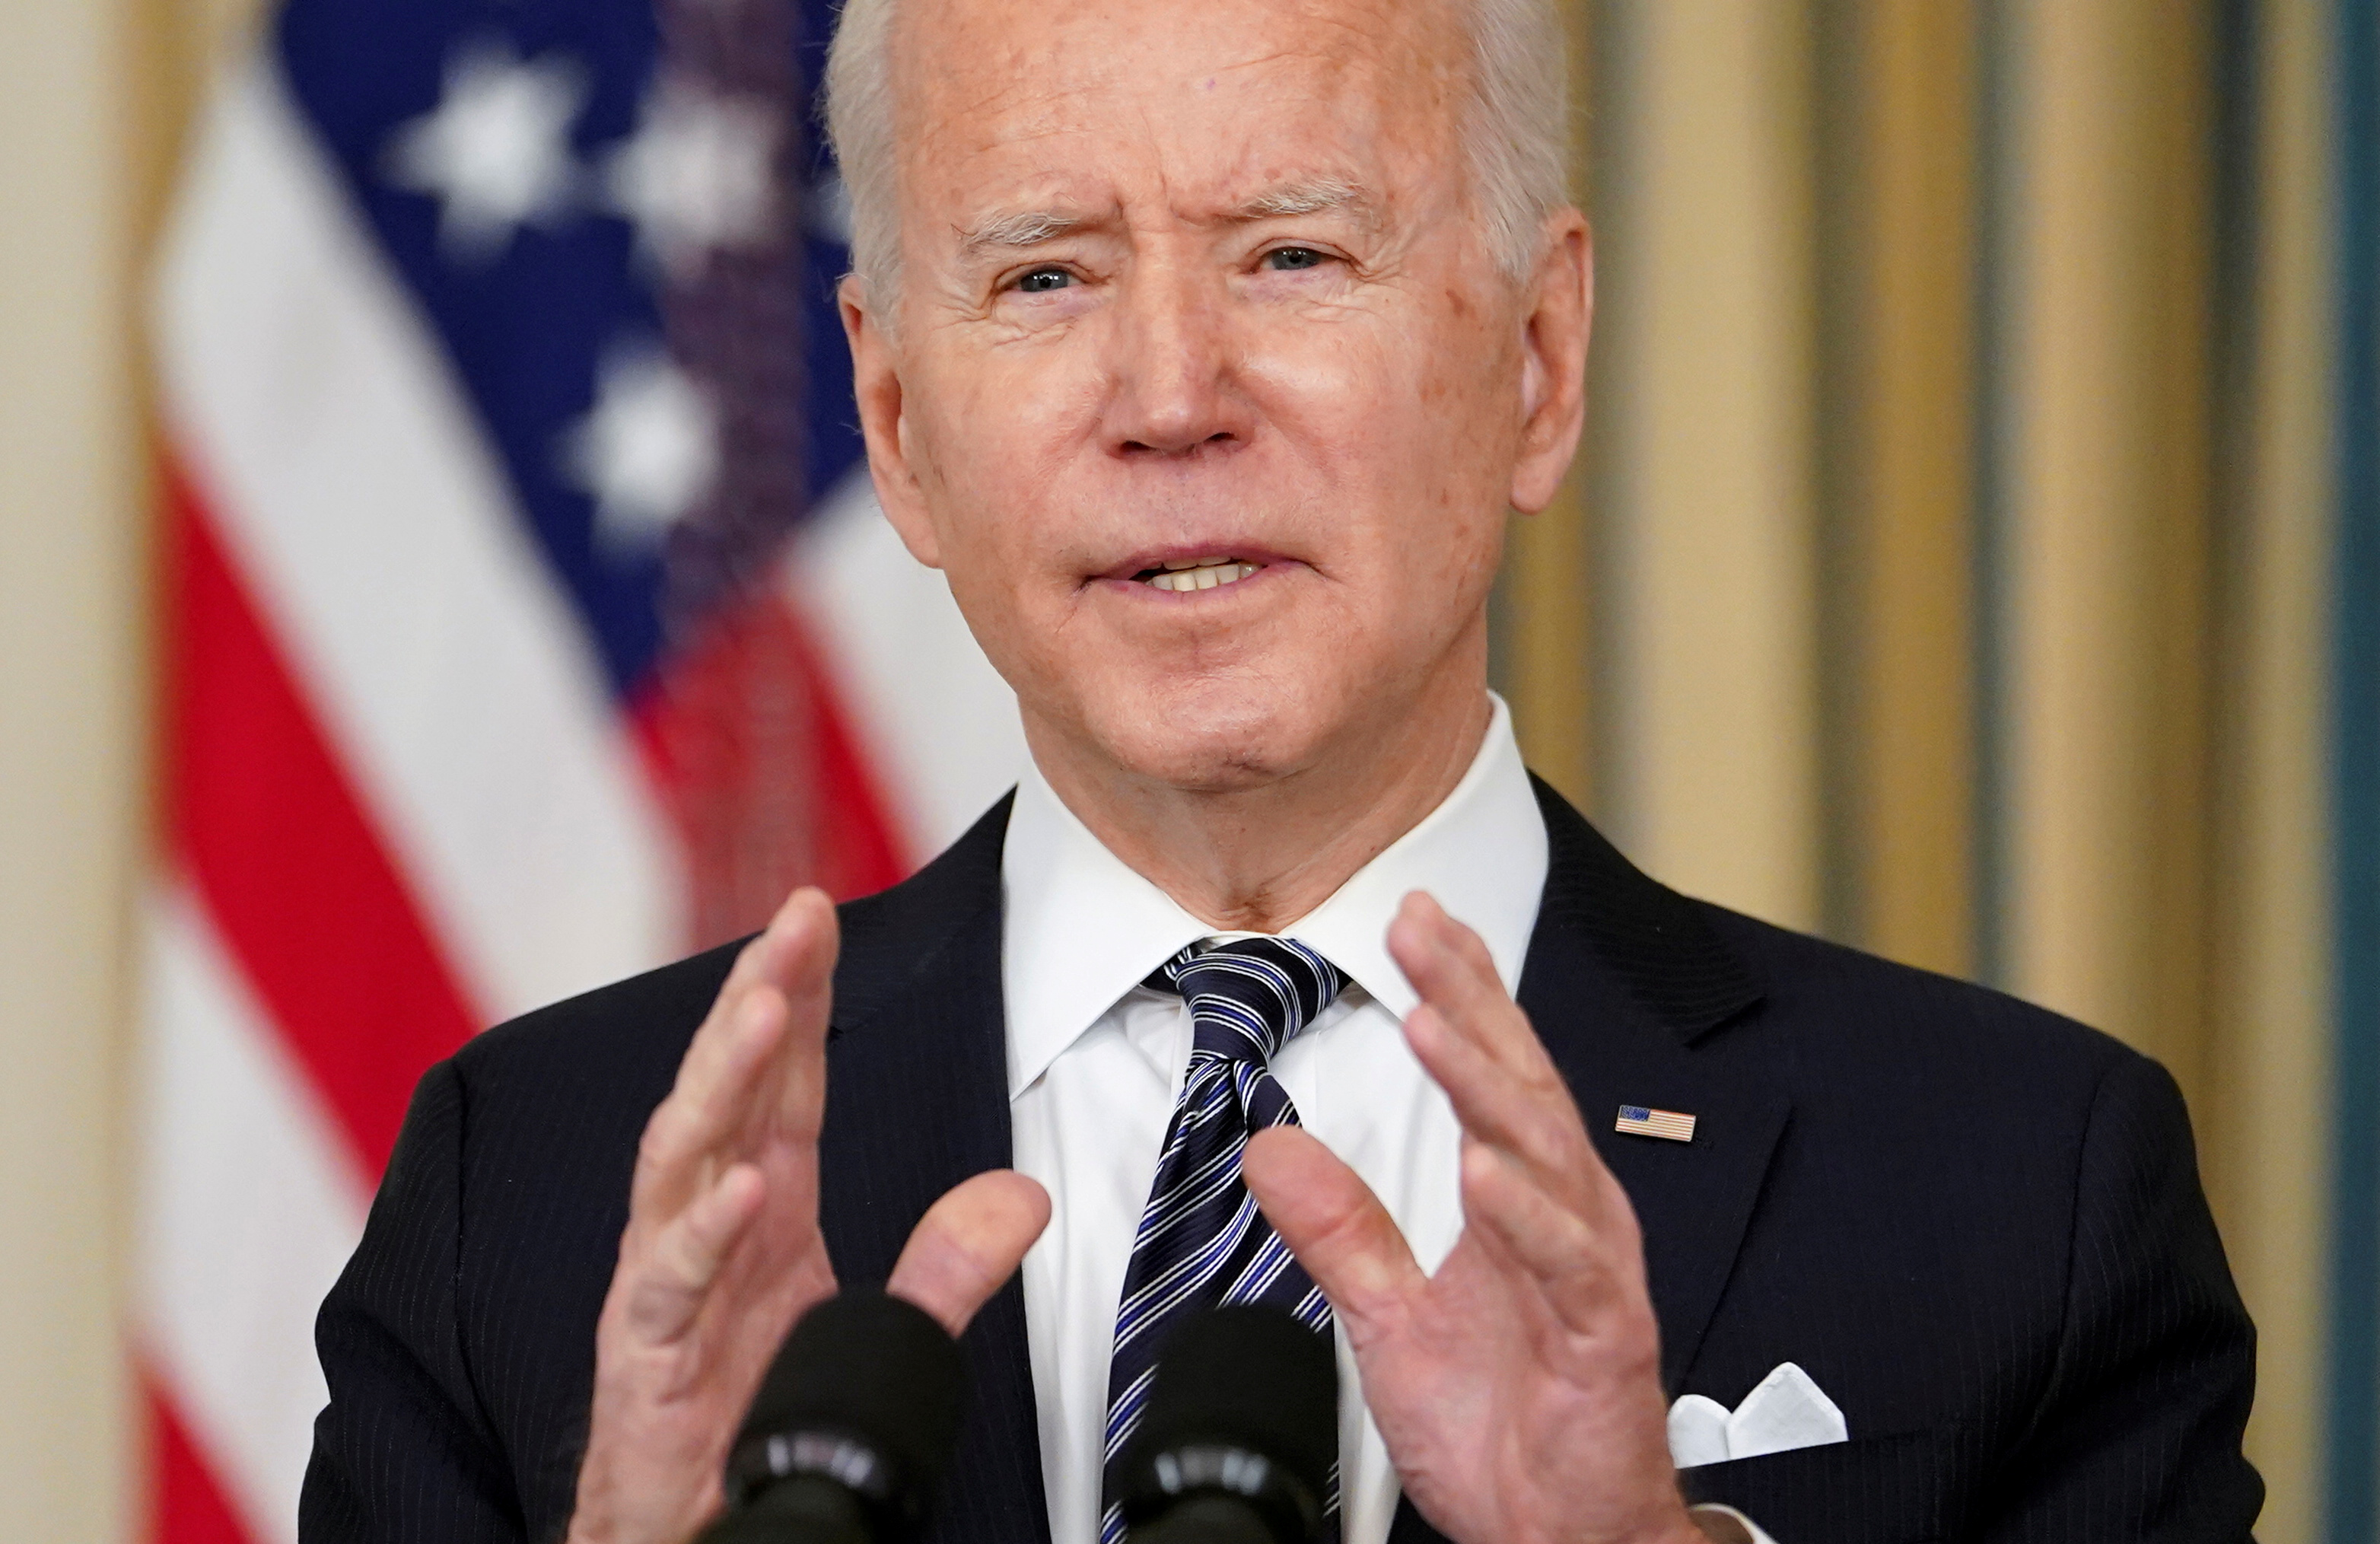 U.S. President Joe Biden speaks about the implementation of the American Rescue Plan in the State Dining Room at the White House in Washington, U.S., March 15, 2021. REUTERS/Kevin Lamarque/File Photo